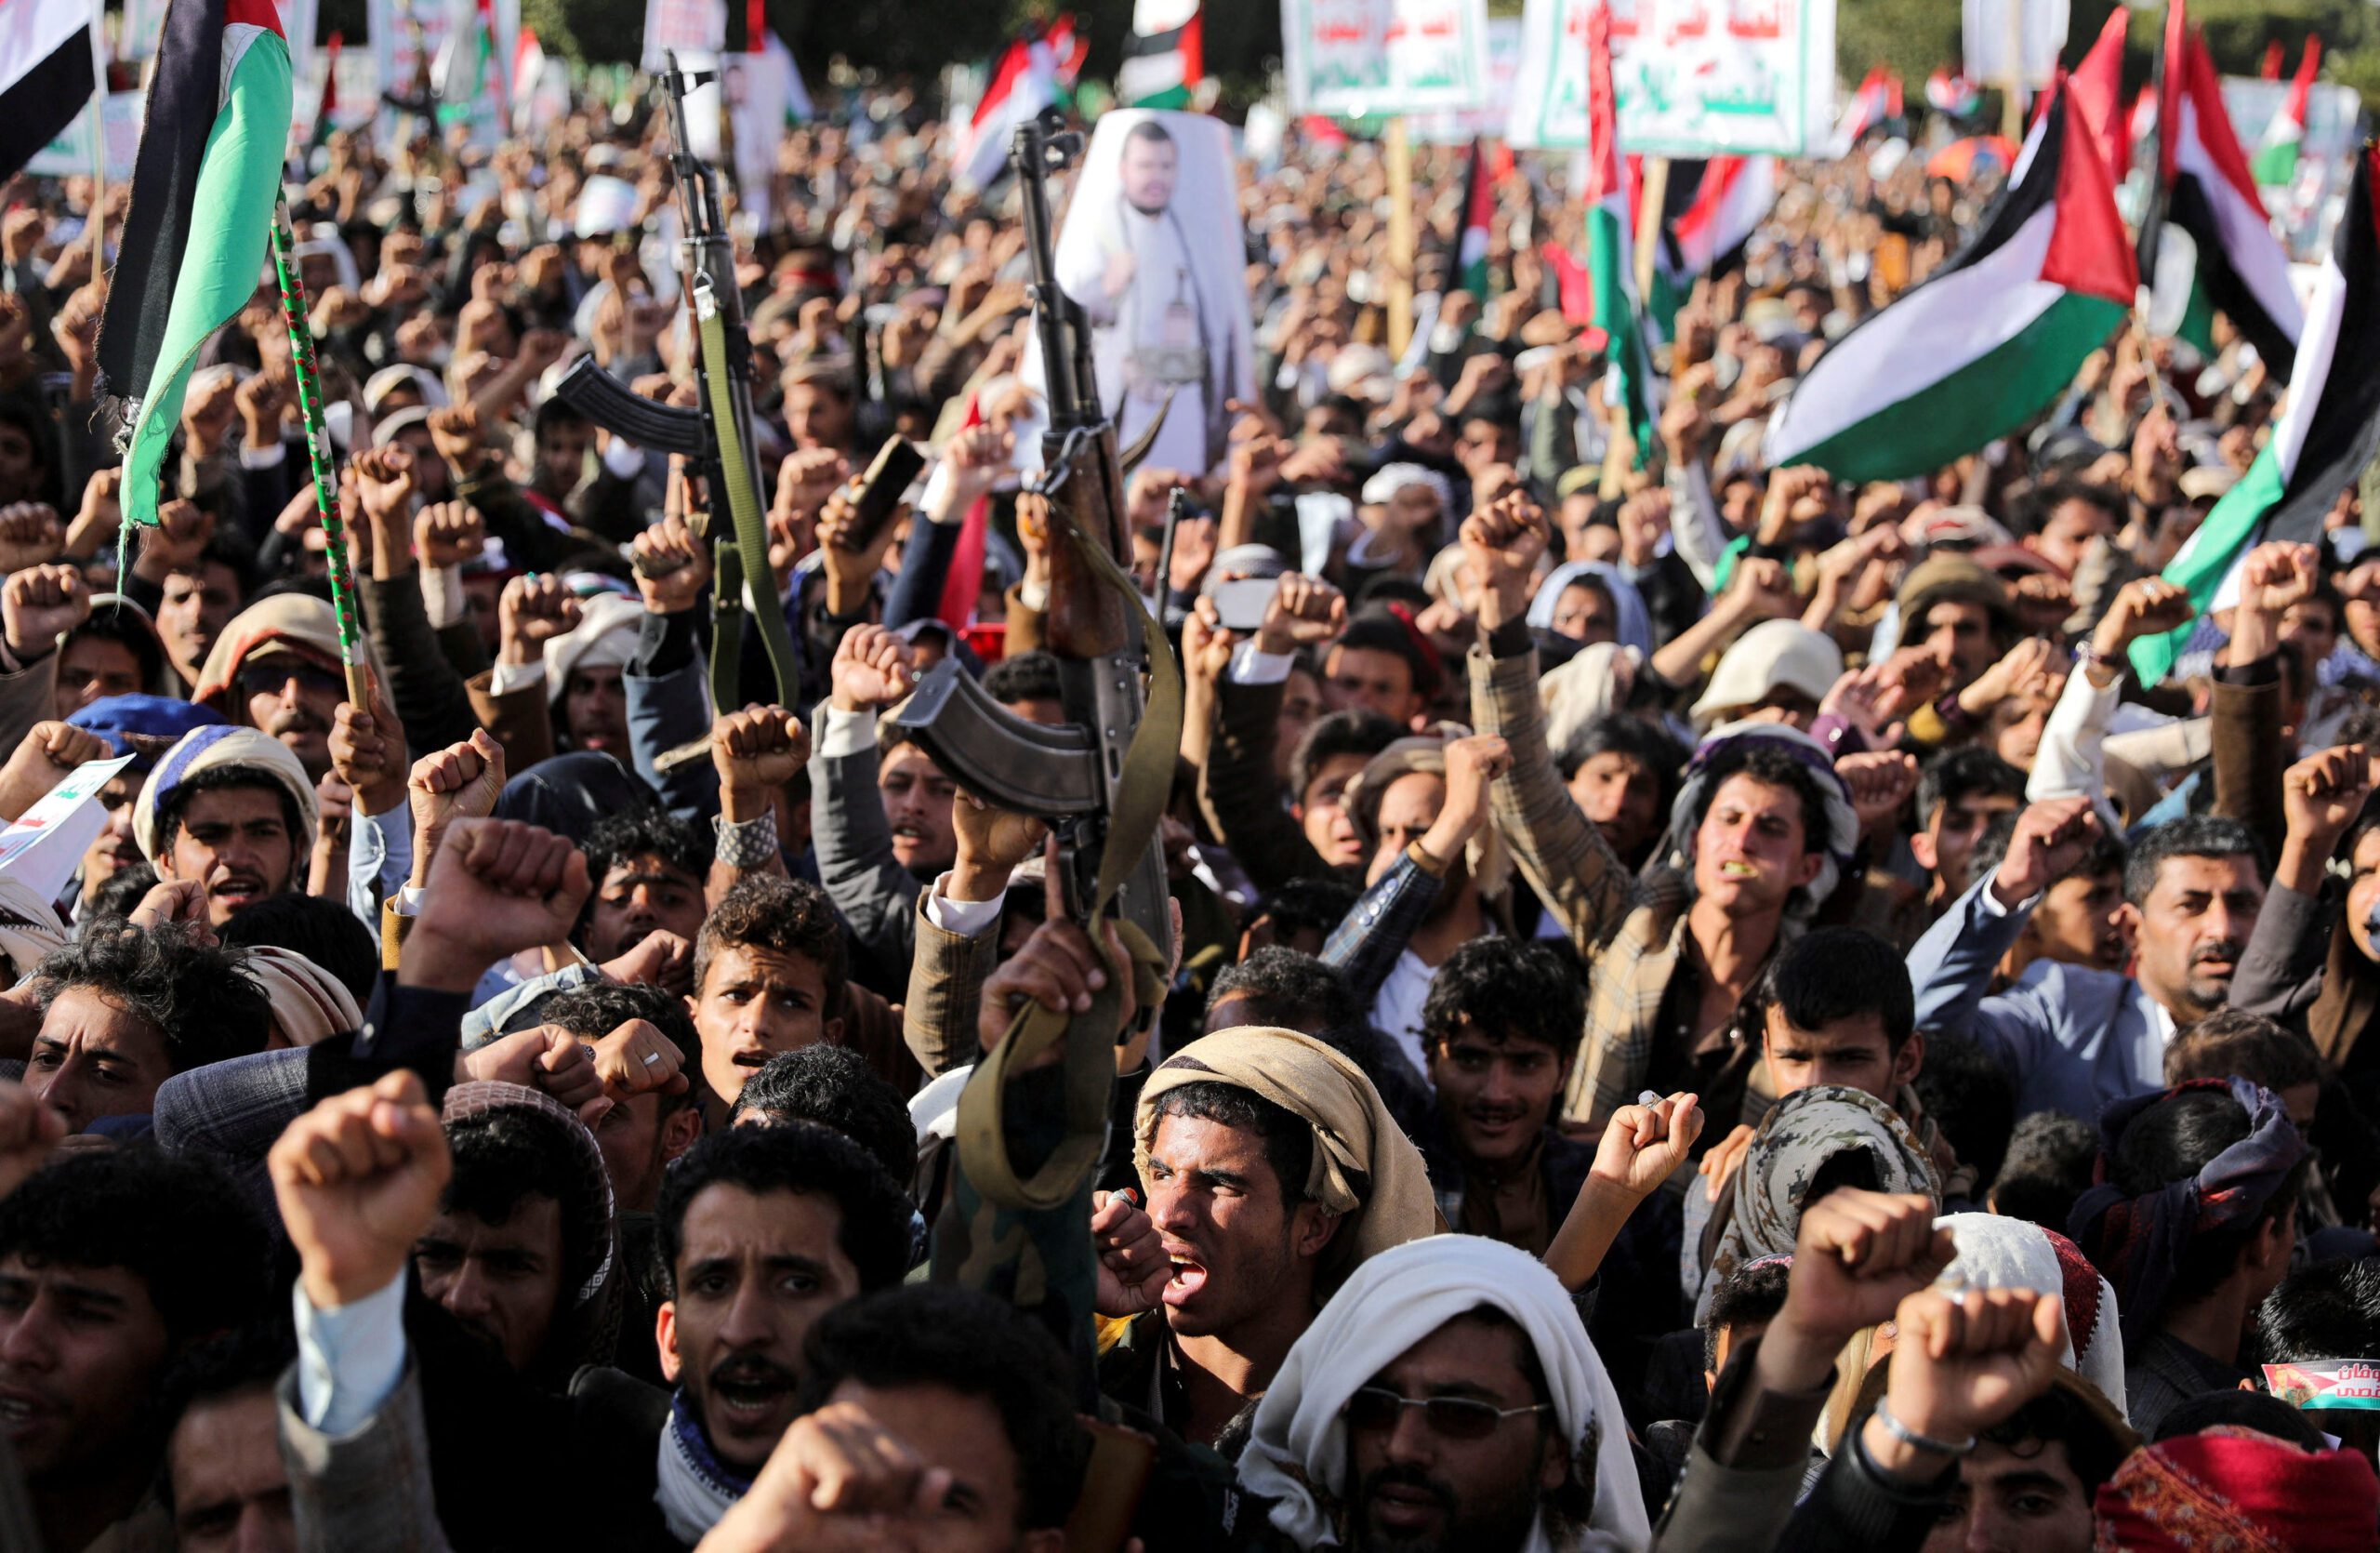 Photo of a large group of Houthi supporters in Yemen